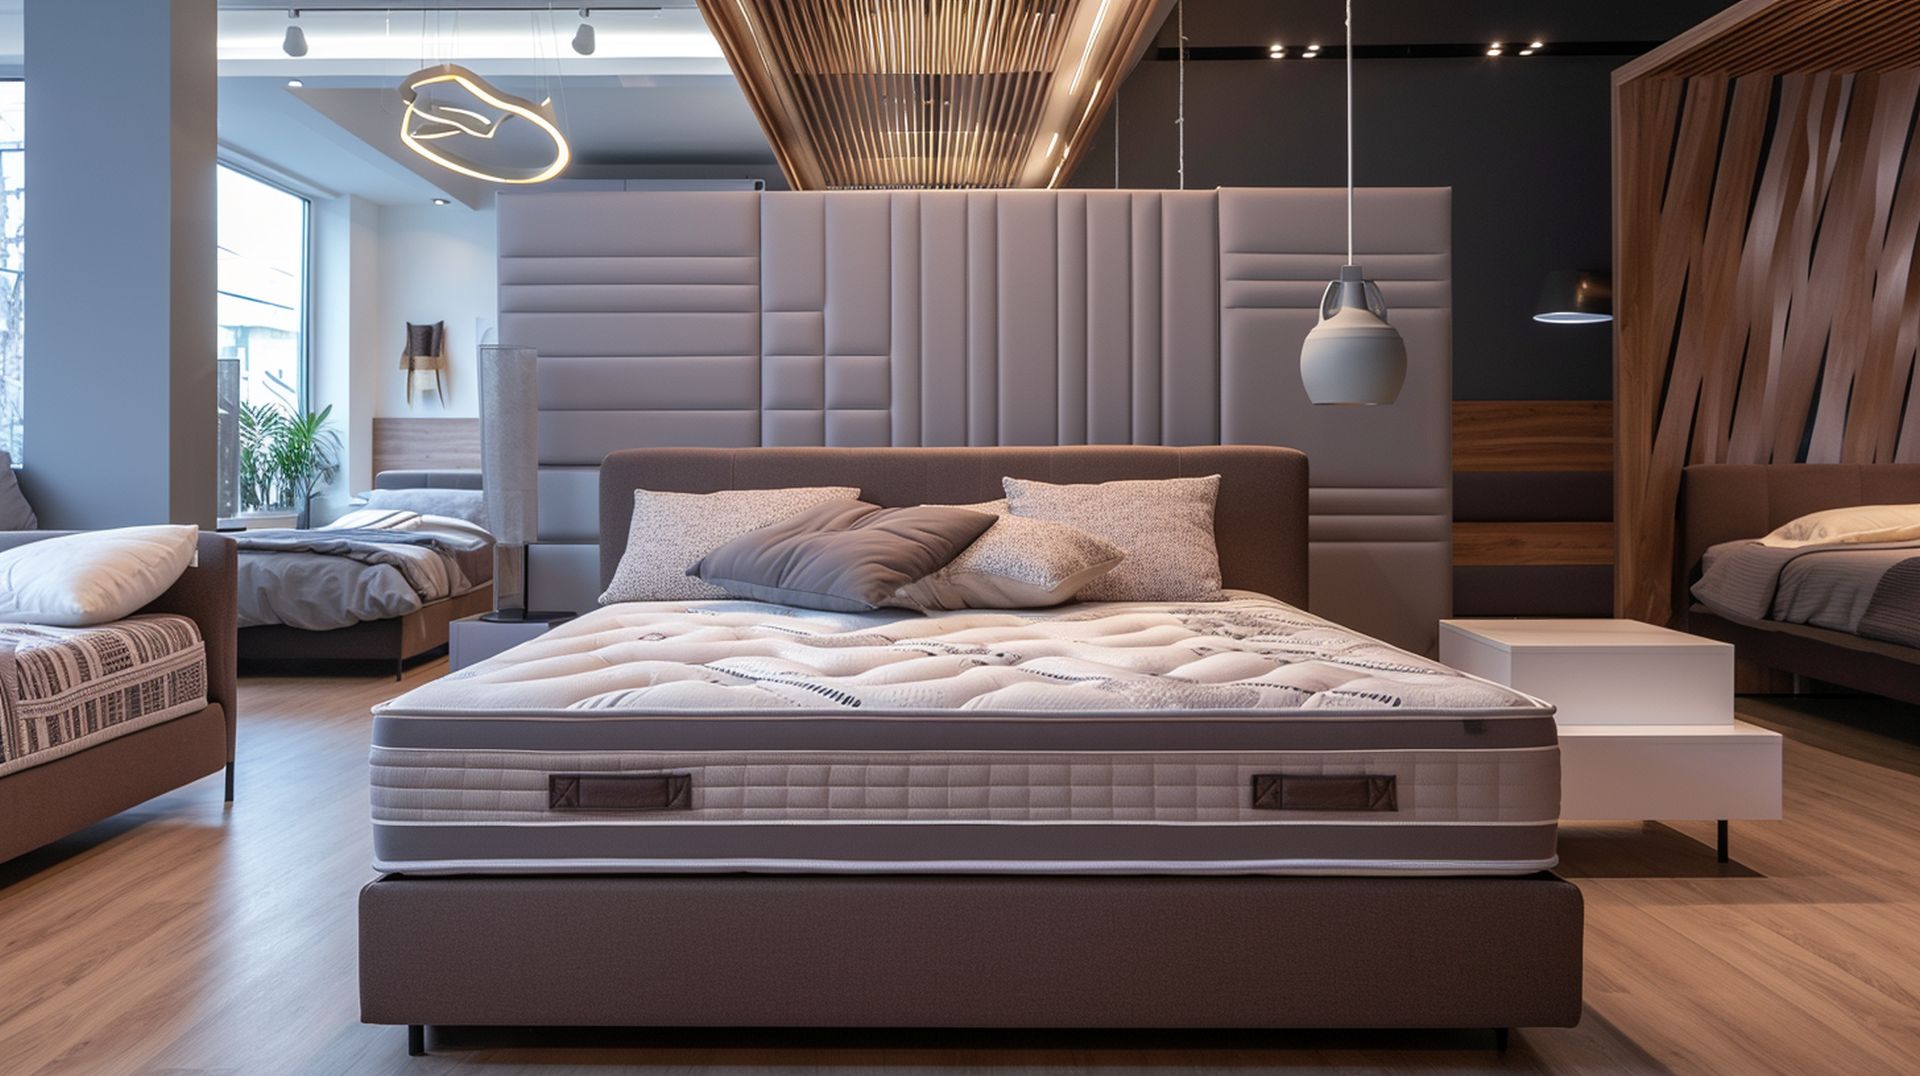 If you're looking for a new bed, mattress stores in Newton offer the best customer and delivery service, financing, and warranties in Massachusetts